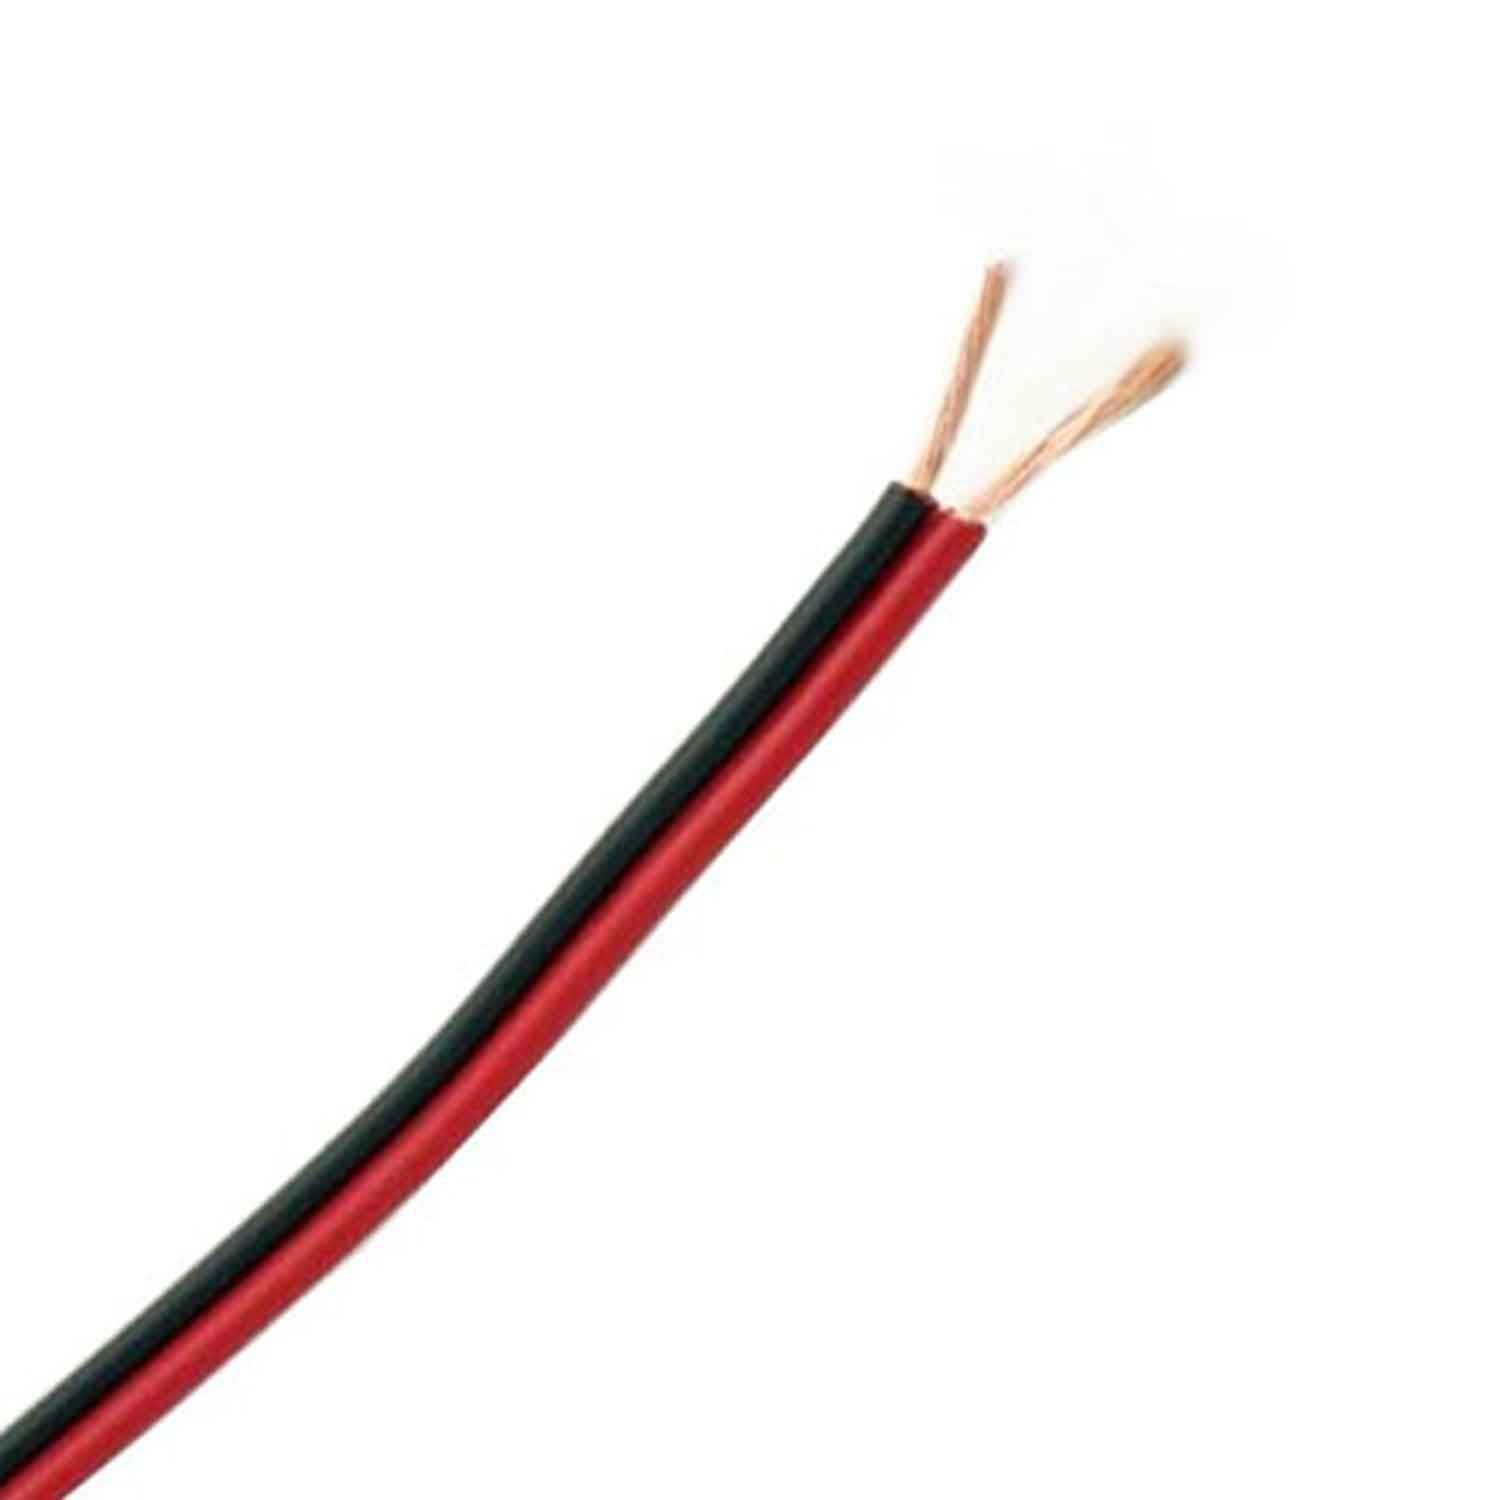 red & black wire 30 ft. - - - - 30 feet long wire - - - - thick 16 gauge